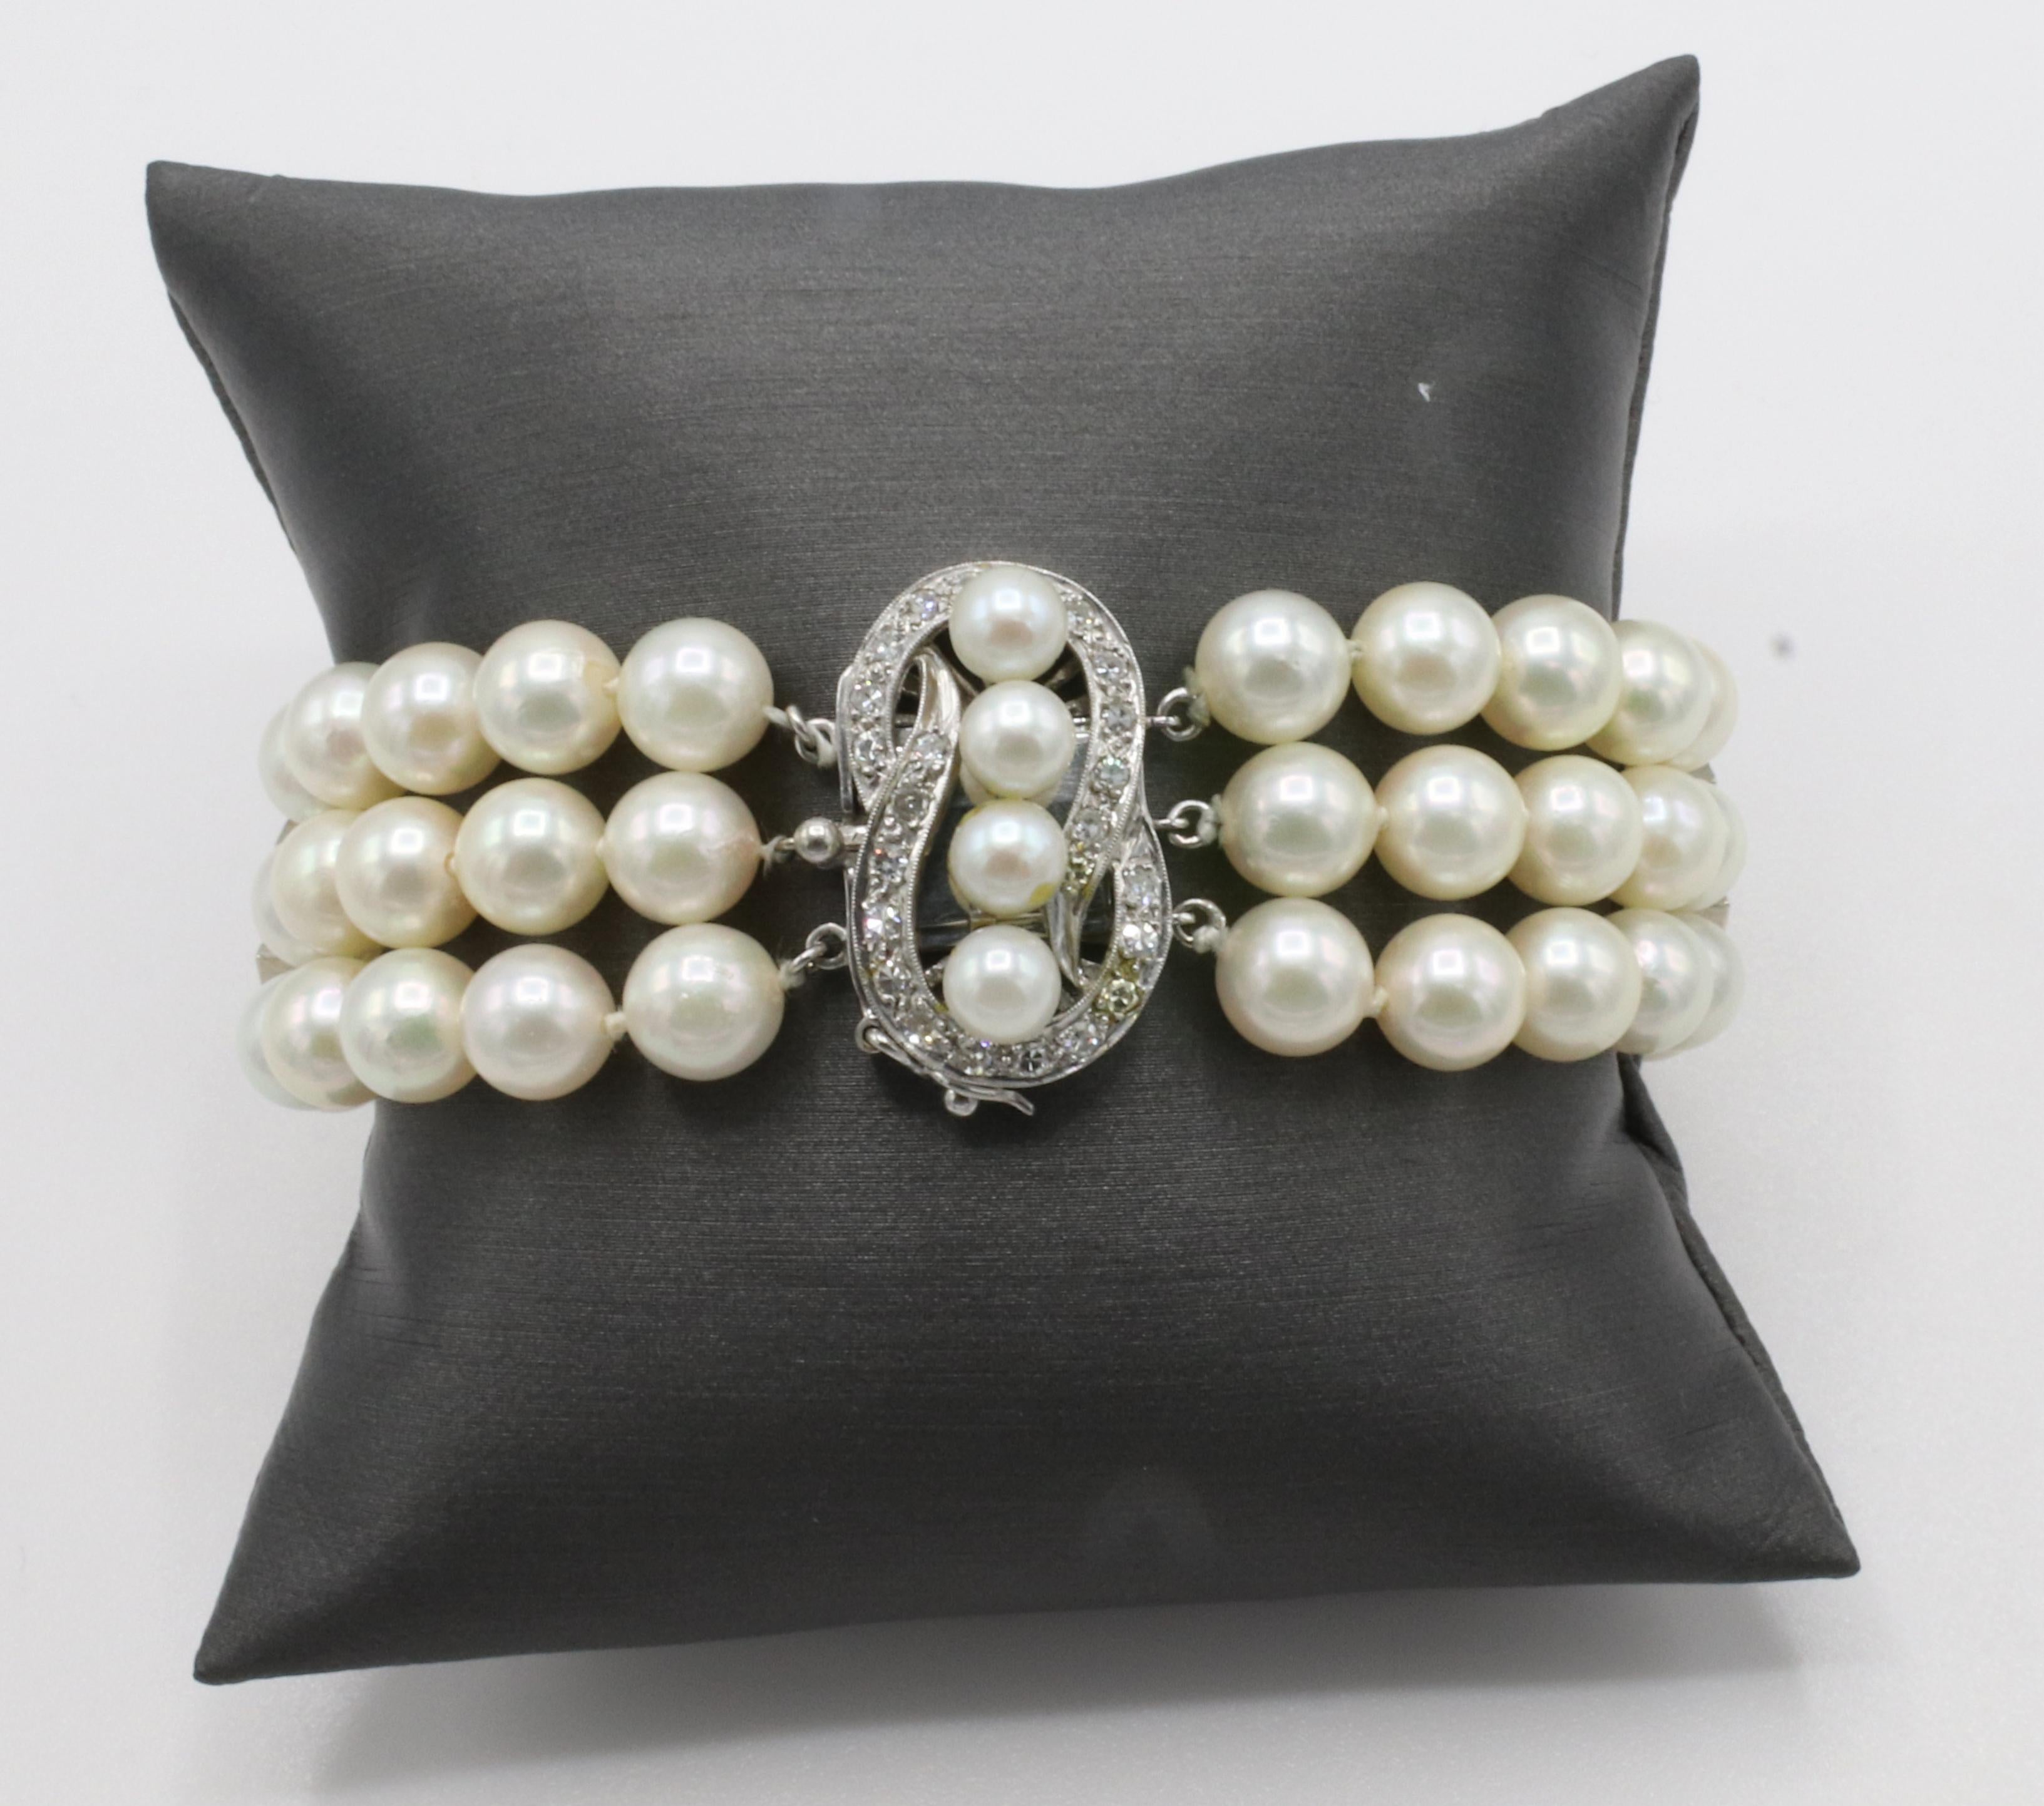 14 Karat White Gold Triple Strand Pearl & Diamond Bracelet 
Metal: 14k white gold
Weight: 43.8 grams
Pearls: 7mm (5mm on clasp), 3 strands 
Length: 7 inches
Width: 21mm
Diamonds: Approx. .28 CTW I SI single cut round diamonds

